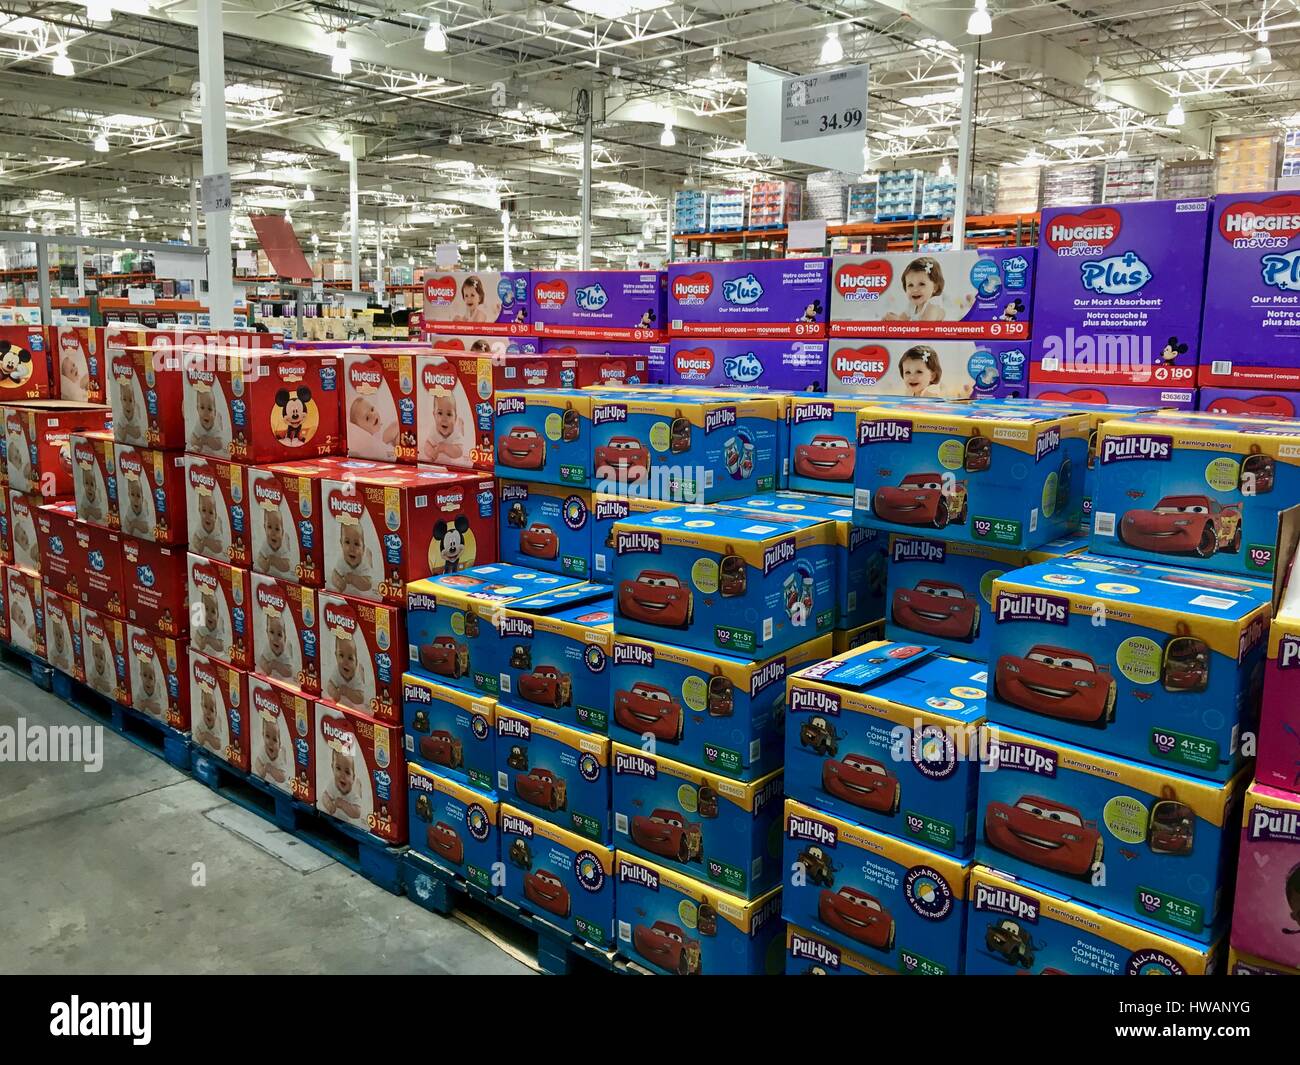 Diapers for sale displayed in the Costco warehouse Stock Photo Alamy